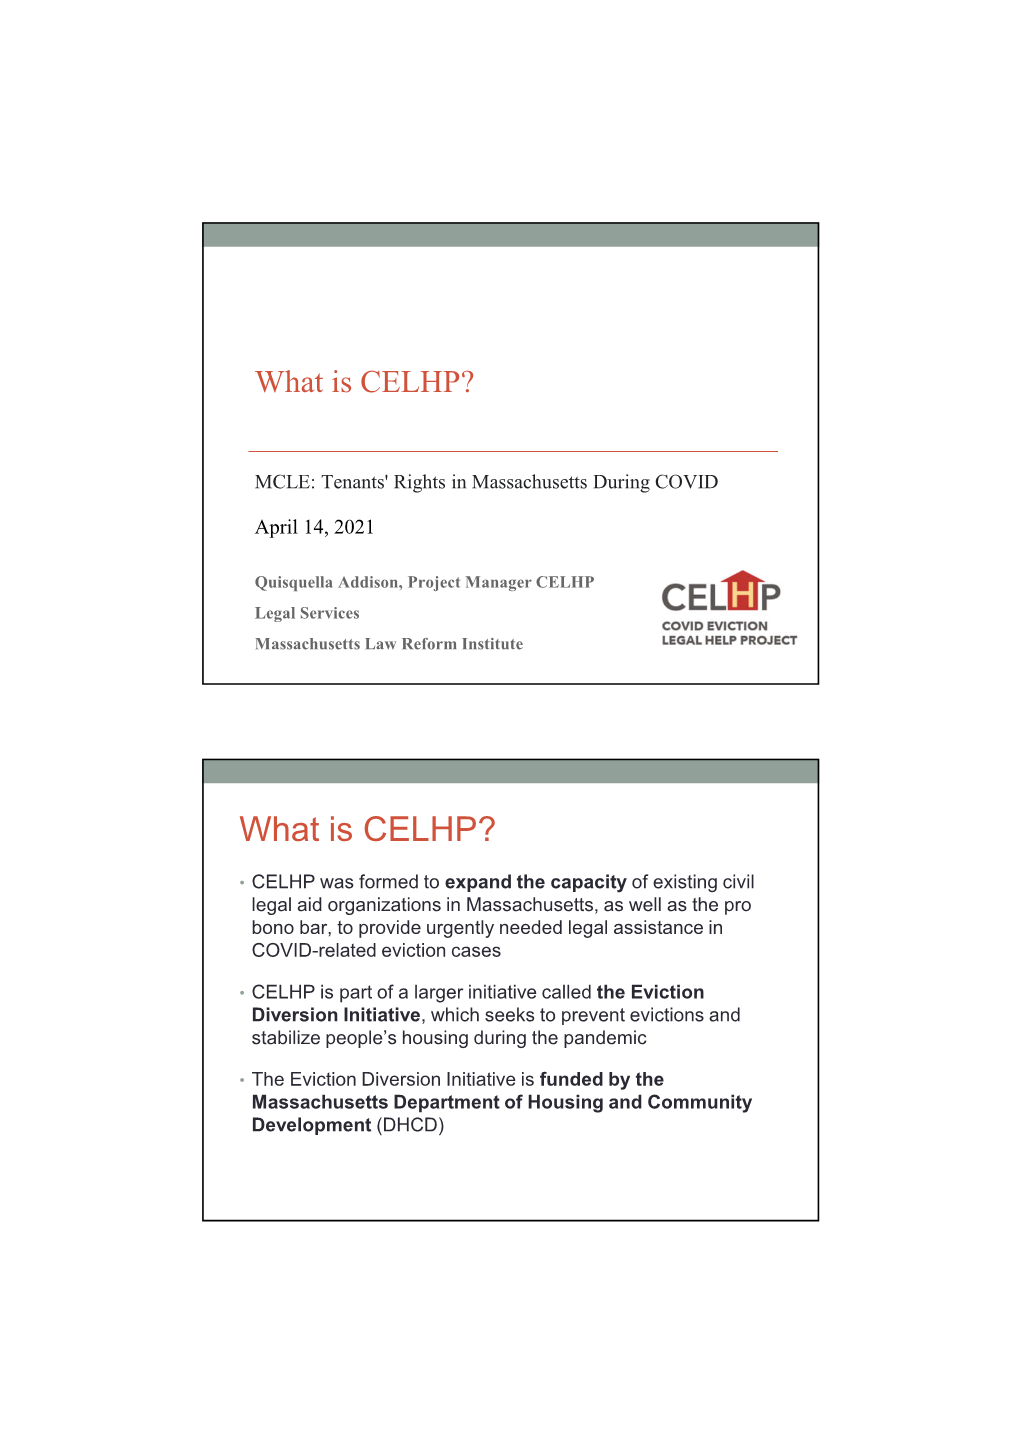 What Is CELHP?